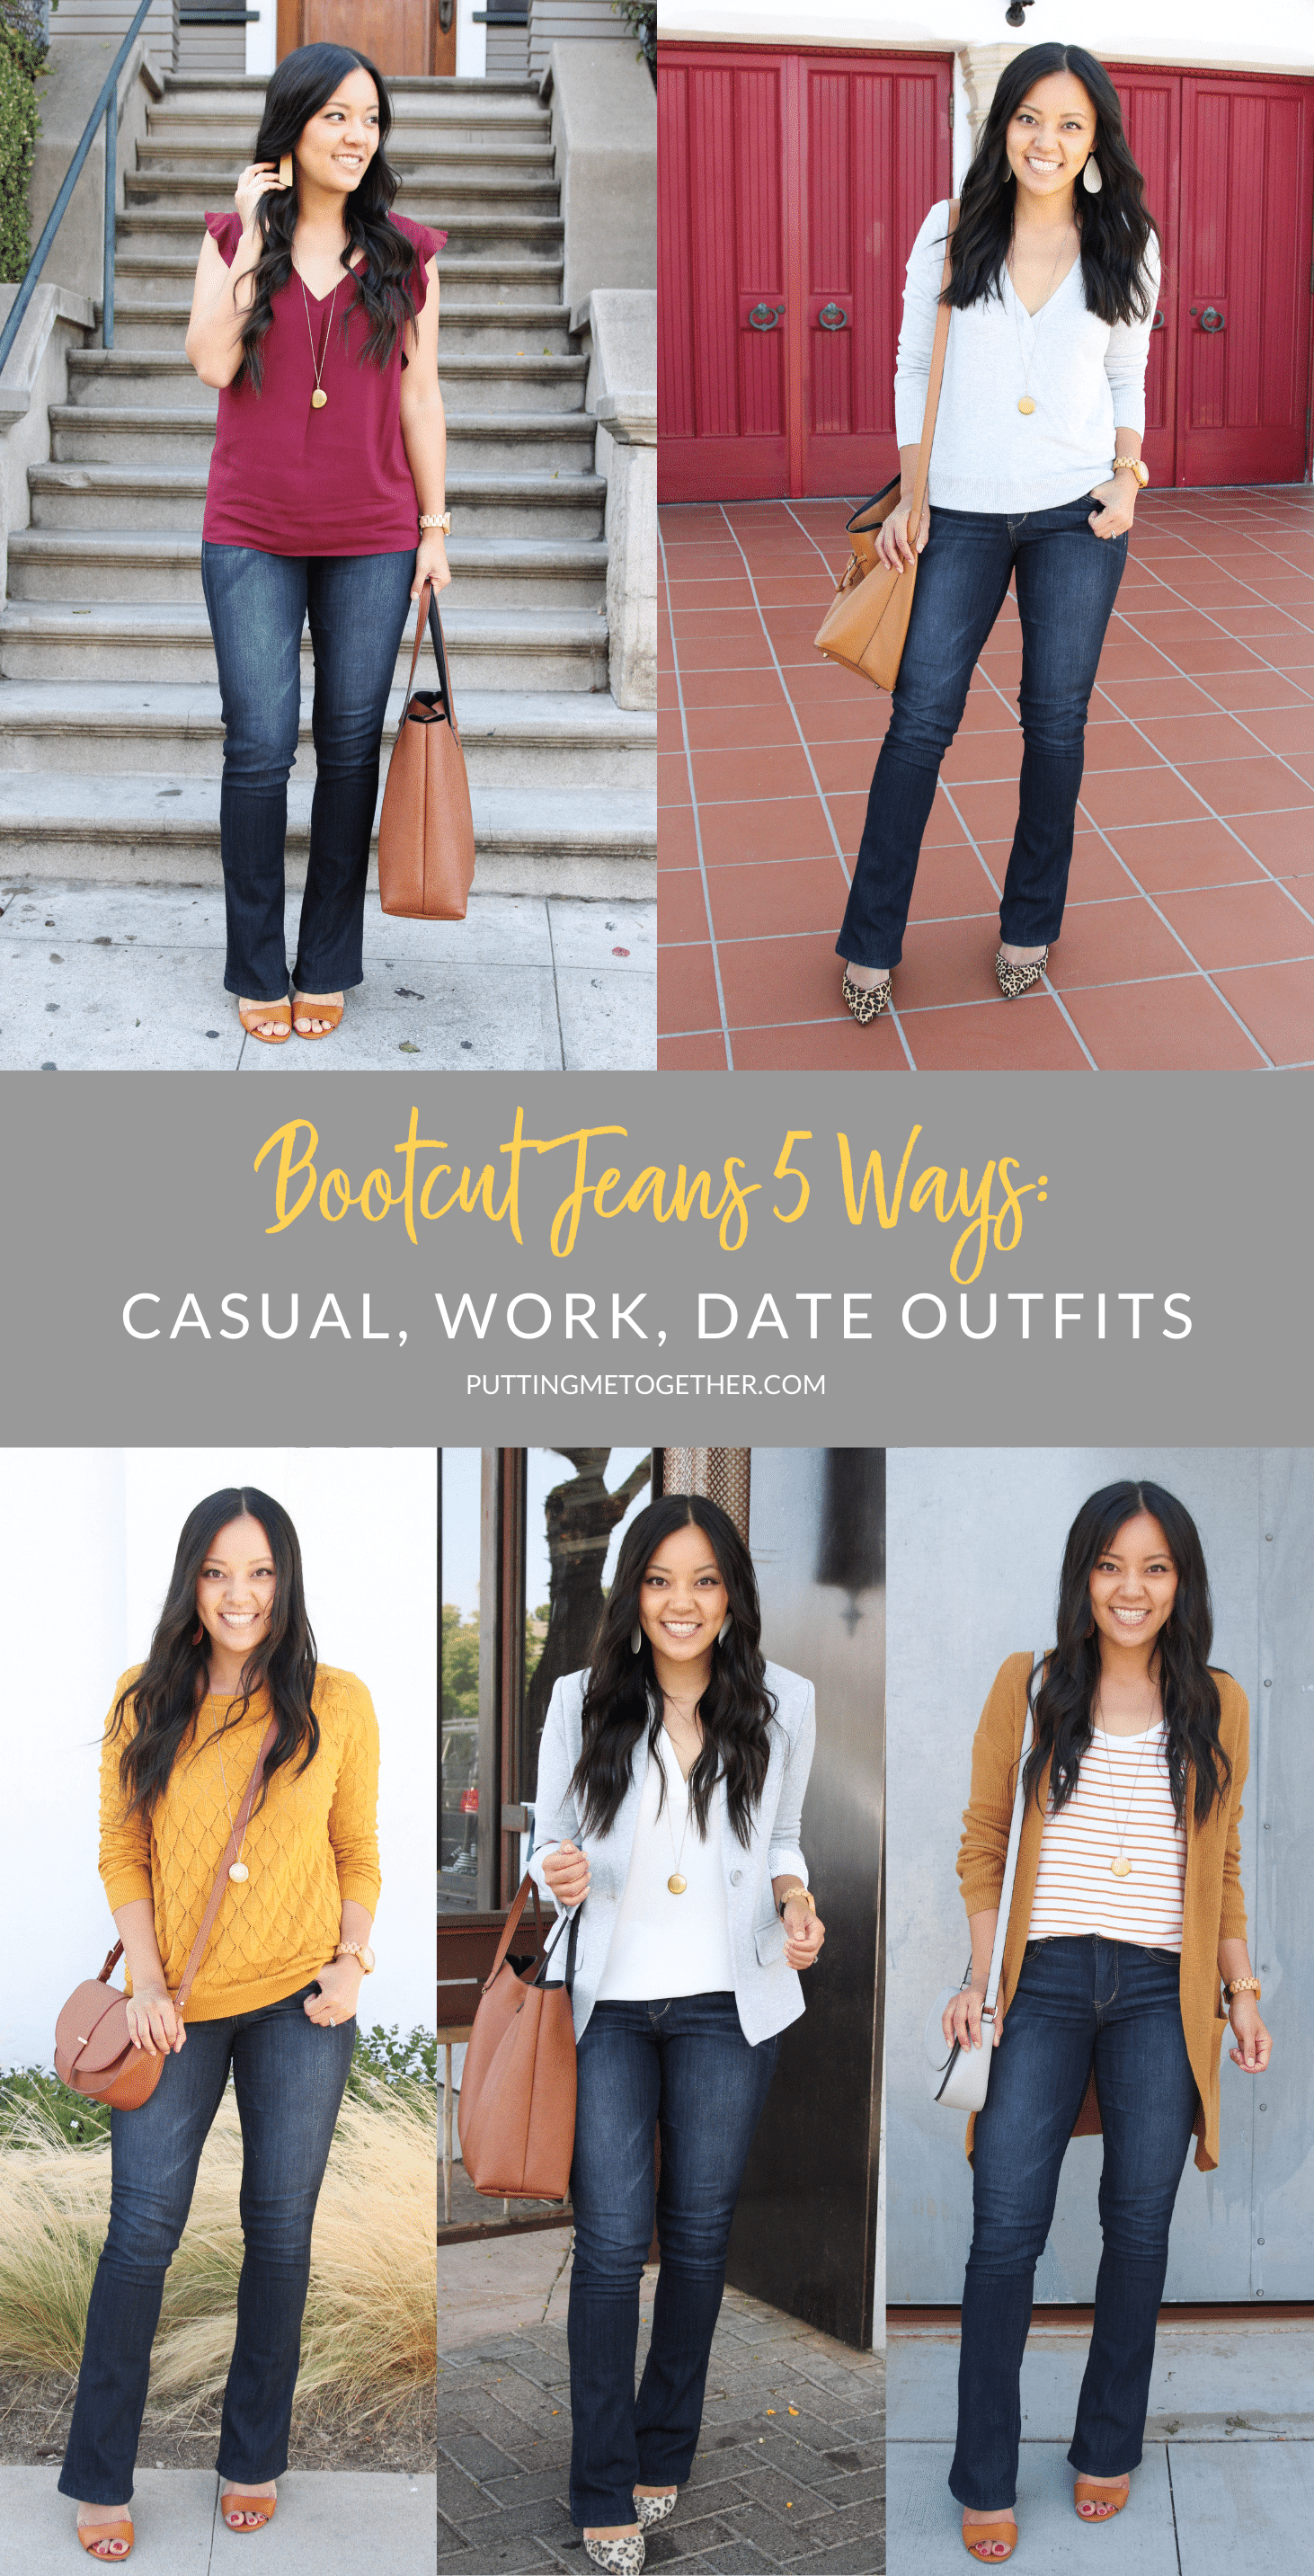 Five Outfits With Bootcut Jeans for Work, Dates, and Casual Outfits